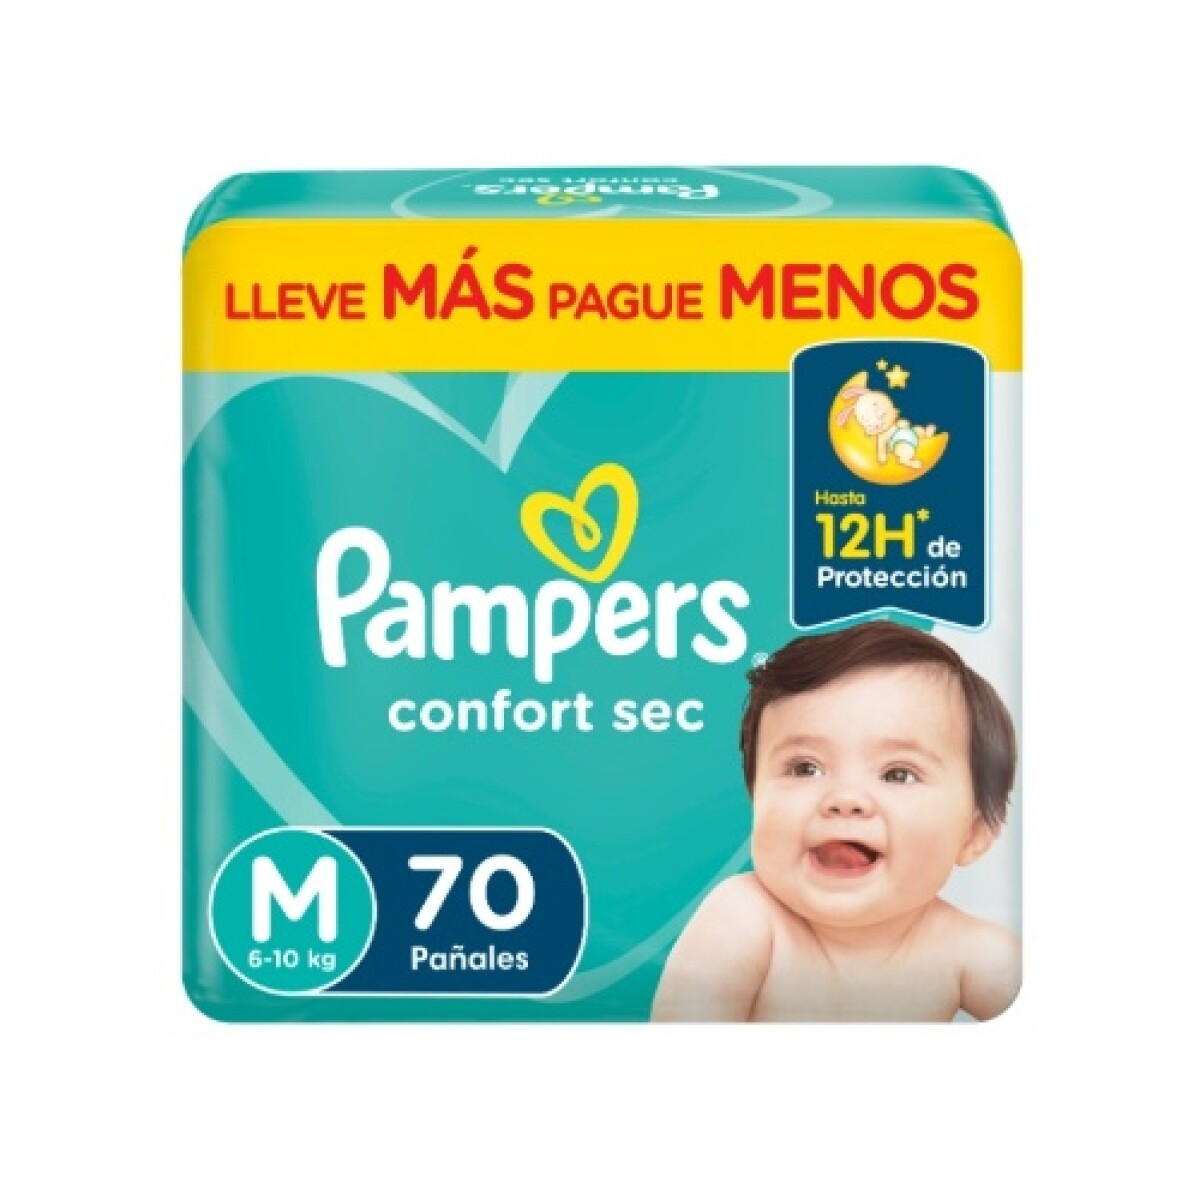 Pañales Pampers Confort Sec M 70 unidades 